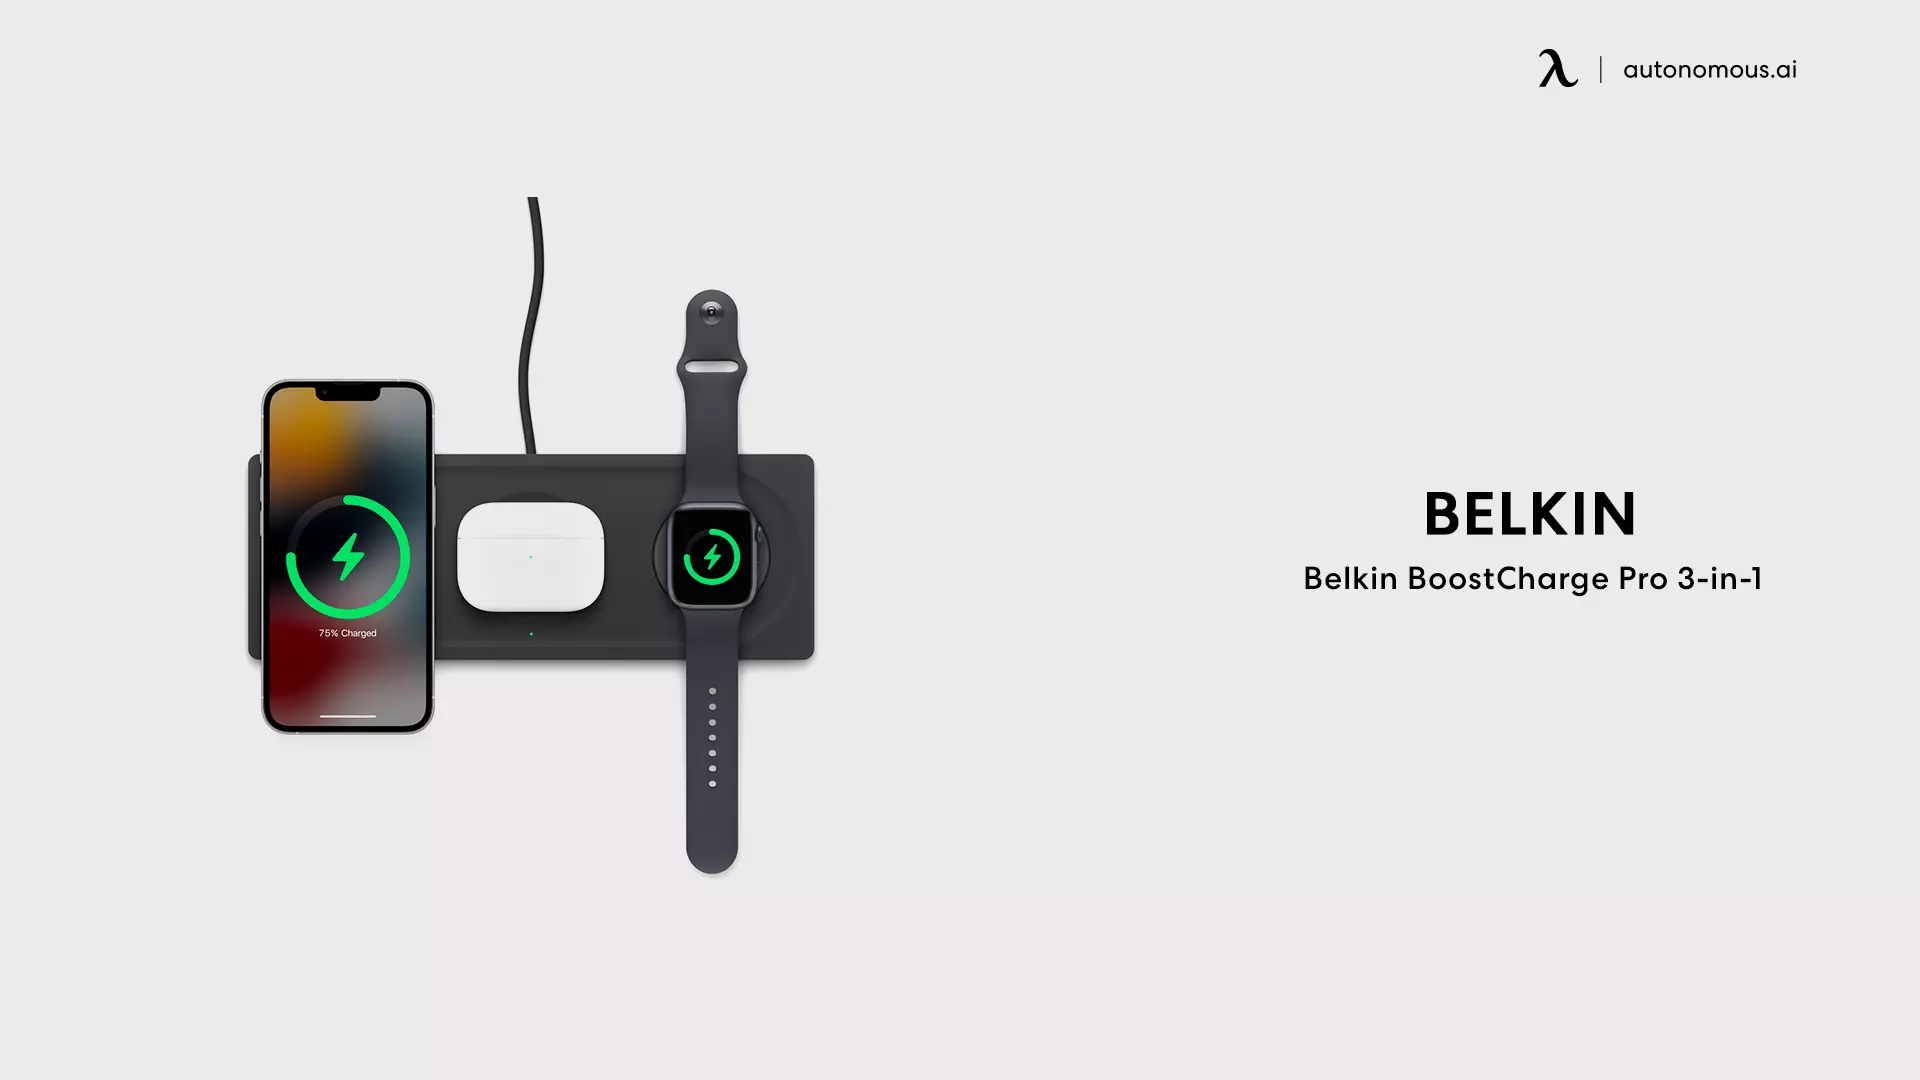 Belkin BoostCharge Pro 3-in-1 fast charger